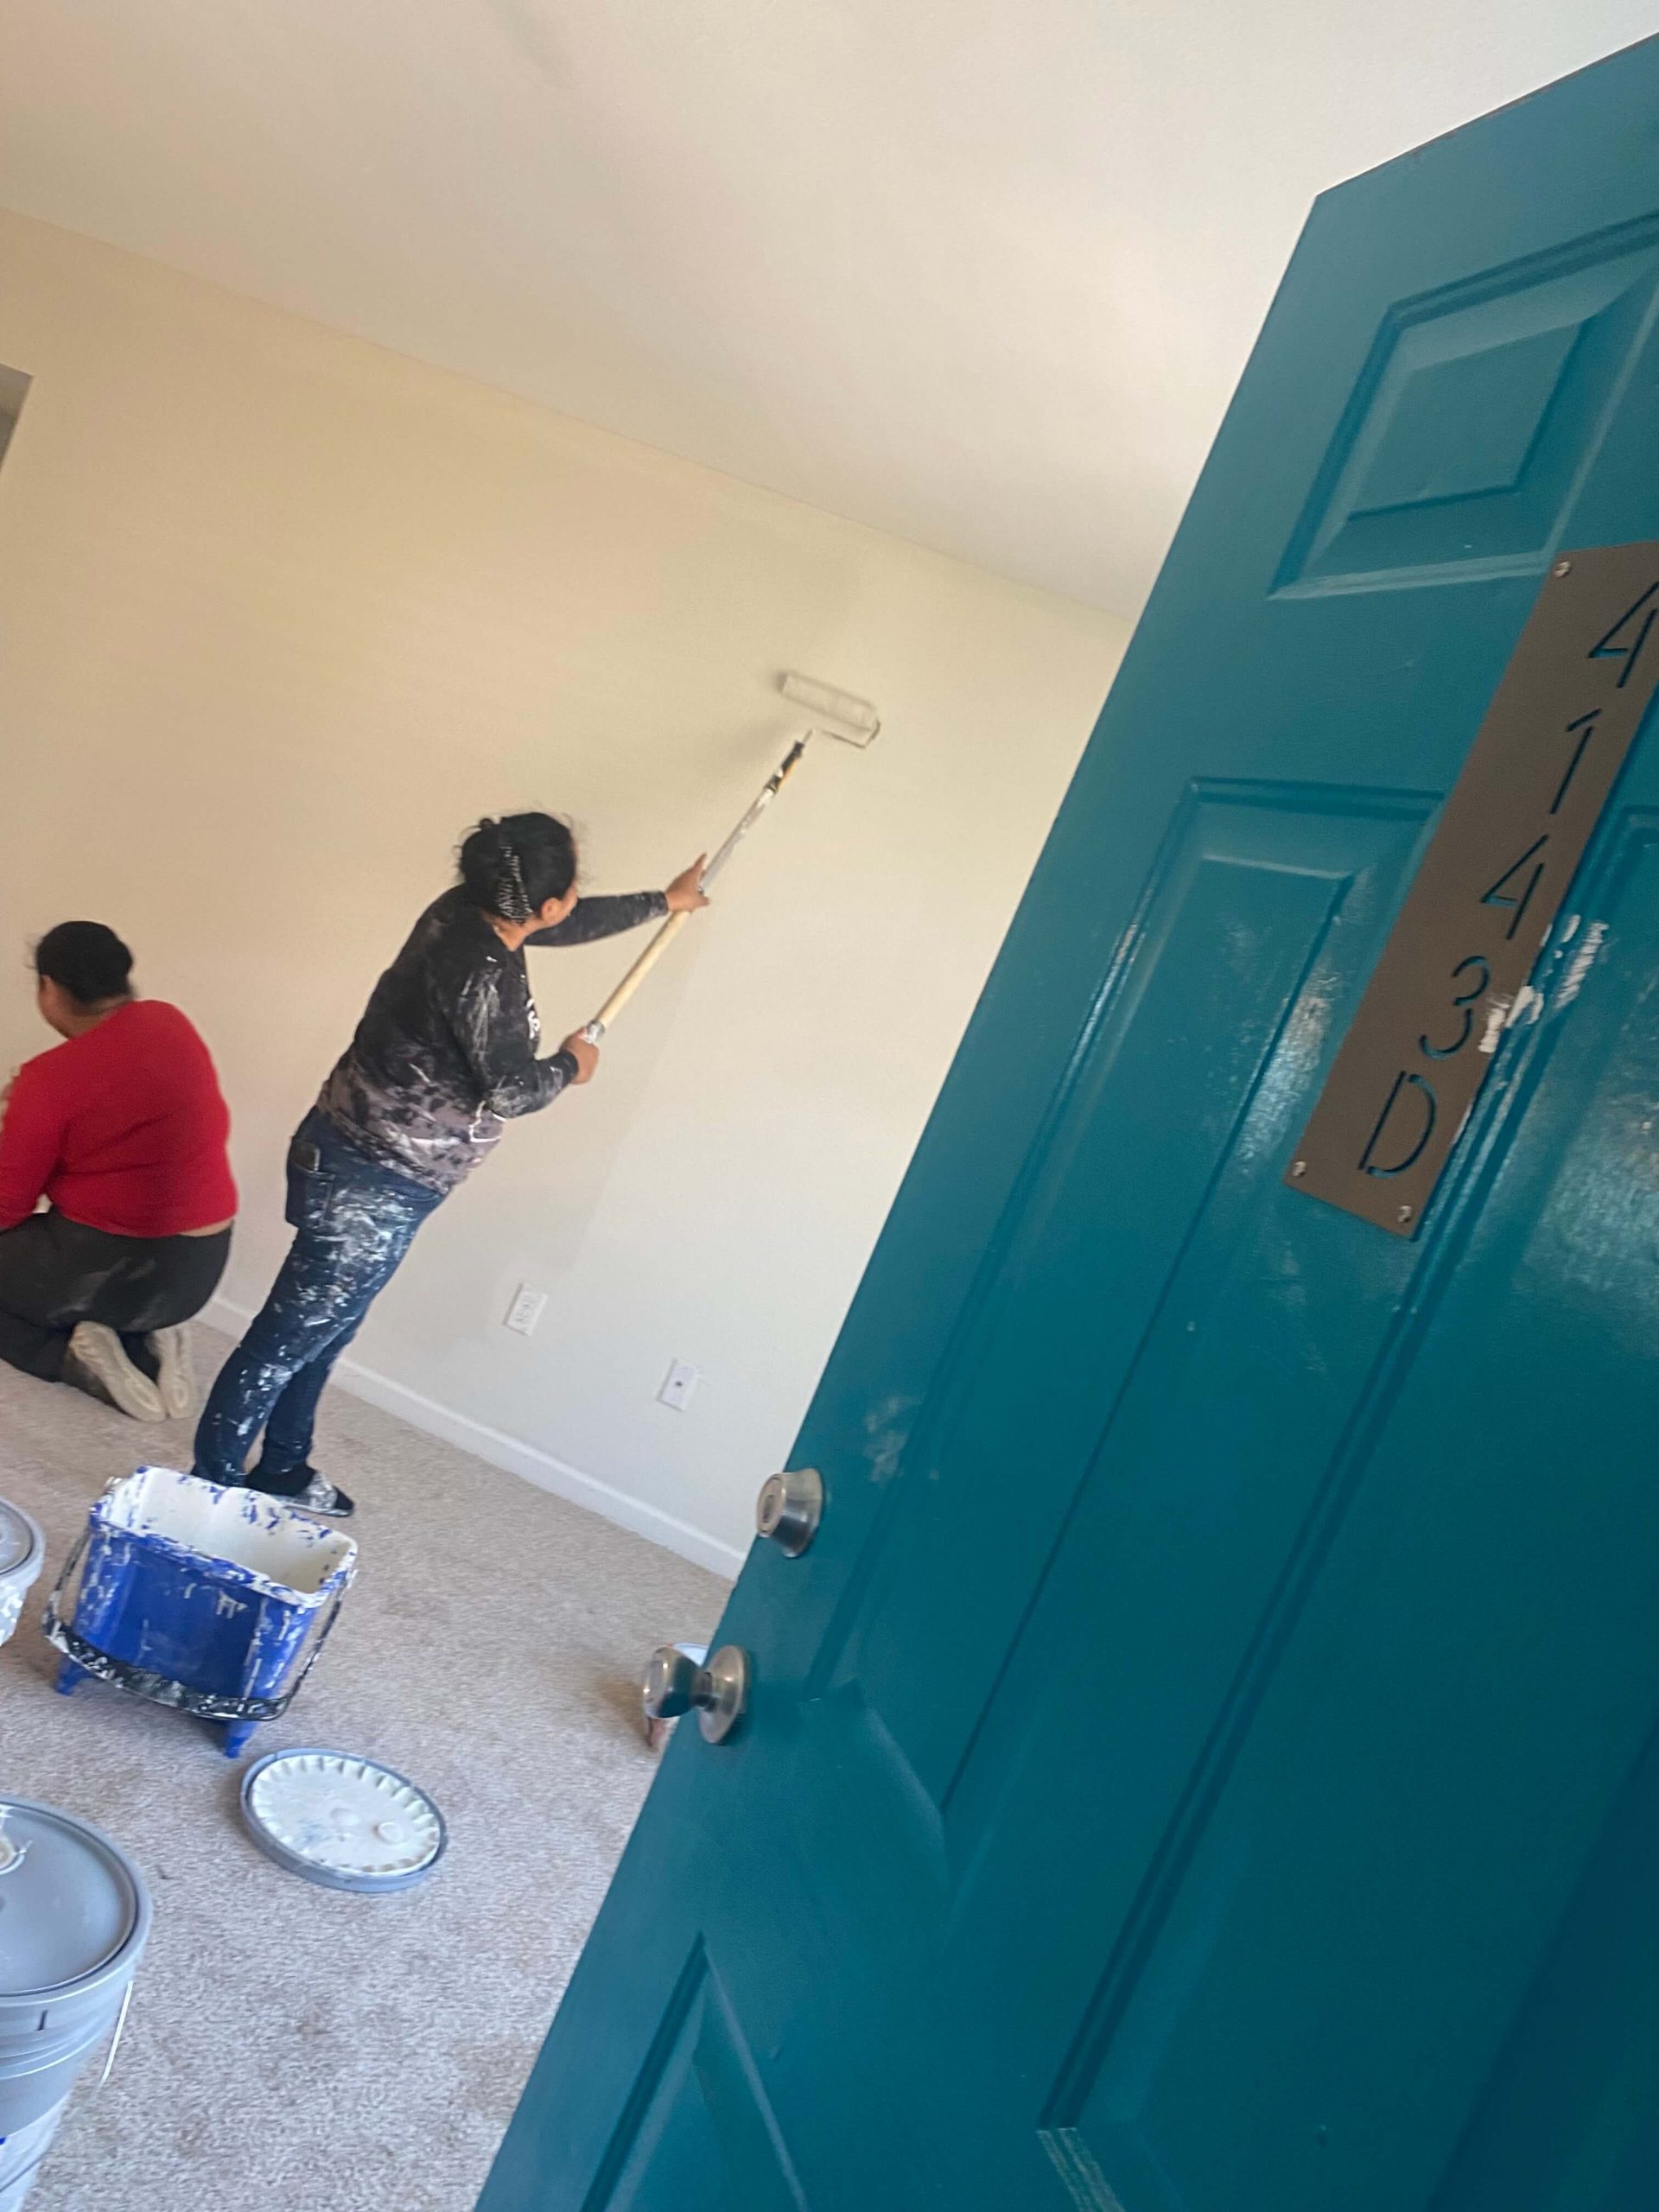 Disaster restoration worker Jenny, dressed in a black shirt and jeans, and her sister Abigail, dressed in an orange shirt and black pants, can be seen through a teal doorway, painting a vacant apartment at the Mayfair Apartment Homes, in New Orleans, with rollers and brushes, facing away from the camera. The right side of Jenny’s body is covered in splotches of white paint. (Courtesy of Jenny)